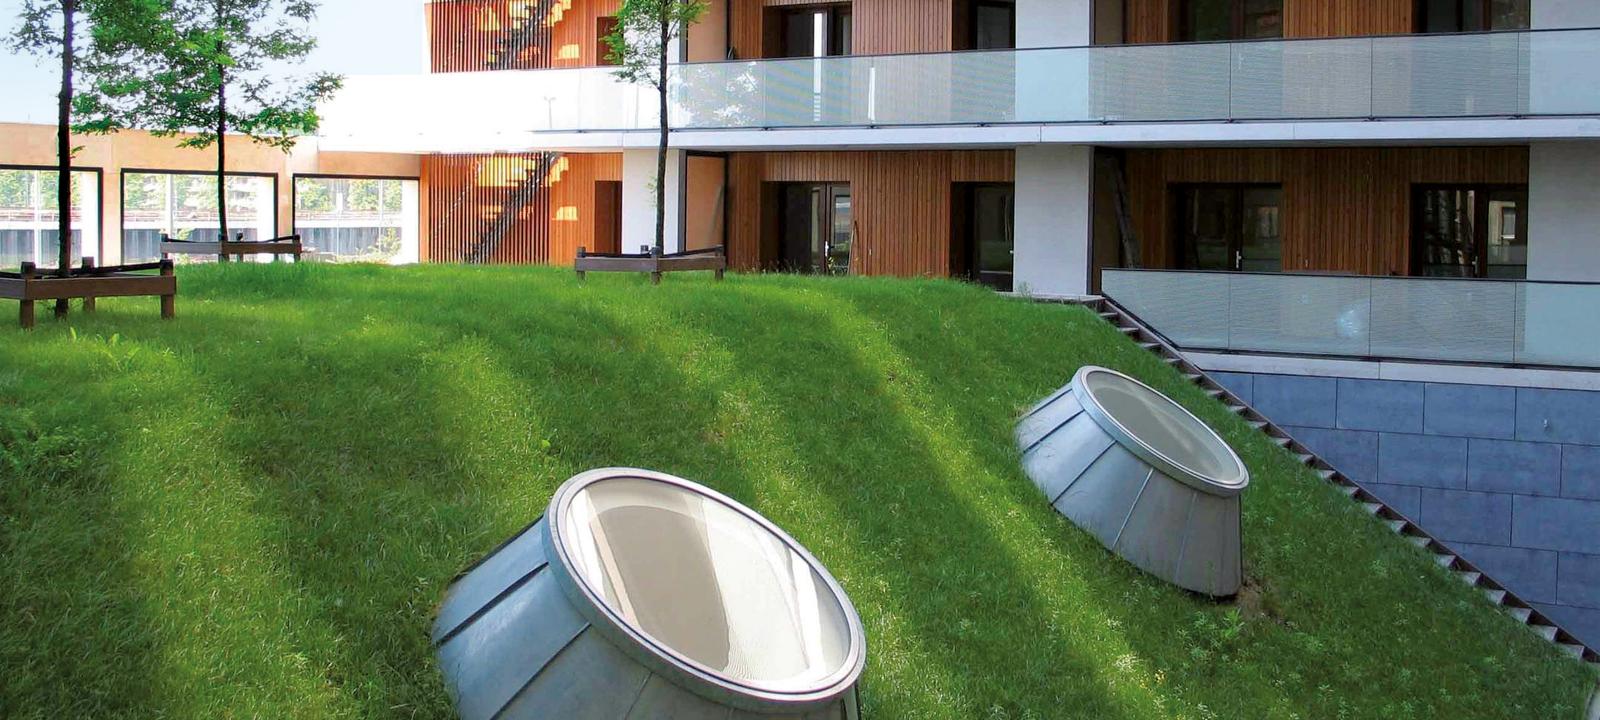 Green roof with pitched areas and skylights and flat areas with small trees